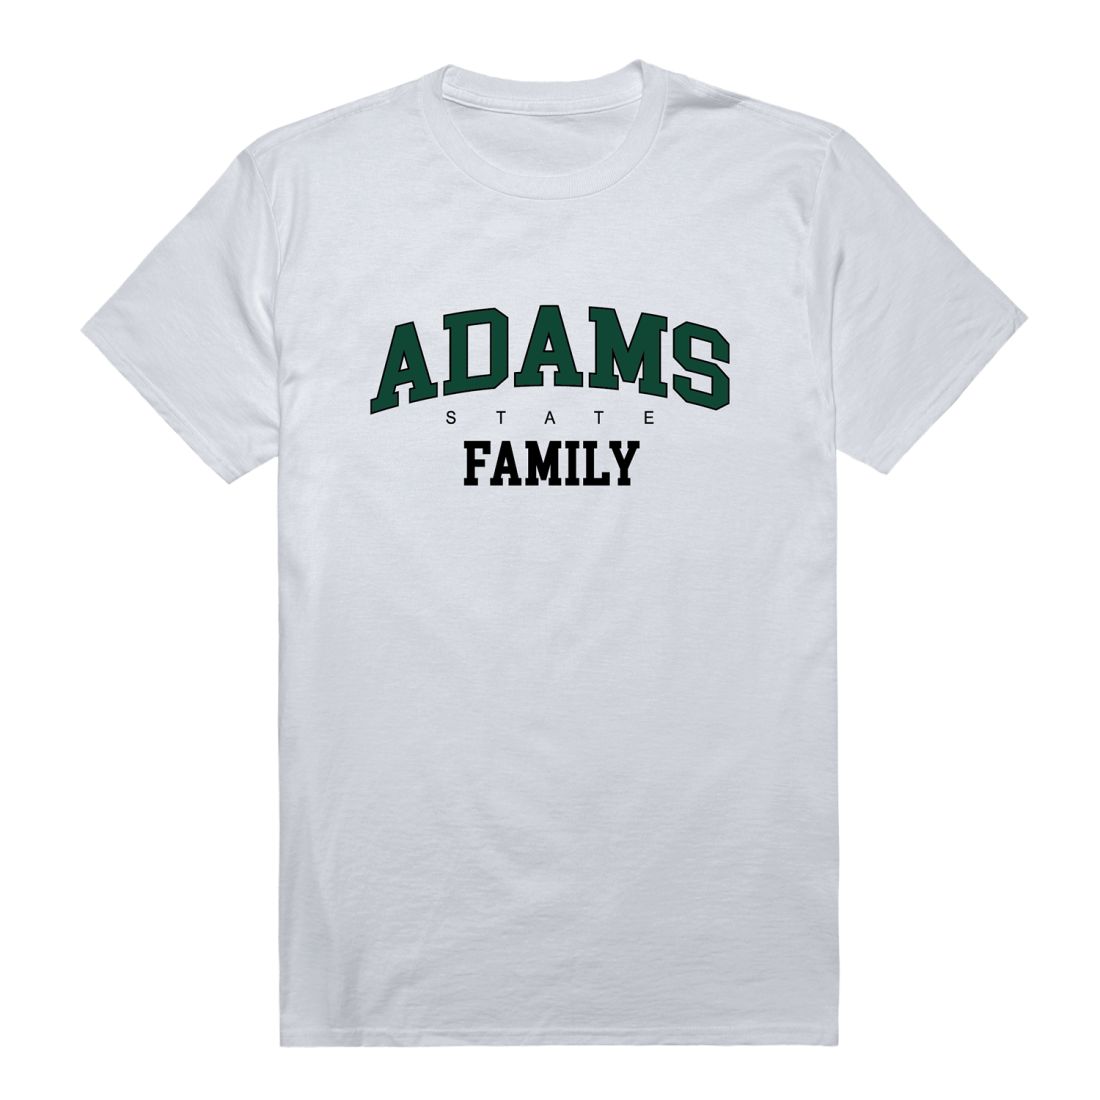 Adams State University Grizzlies Family T-Shirt